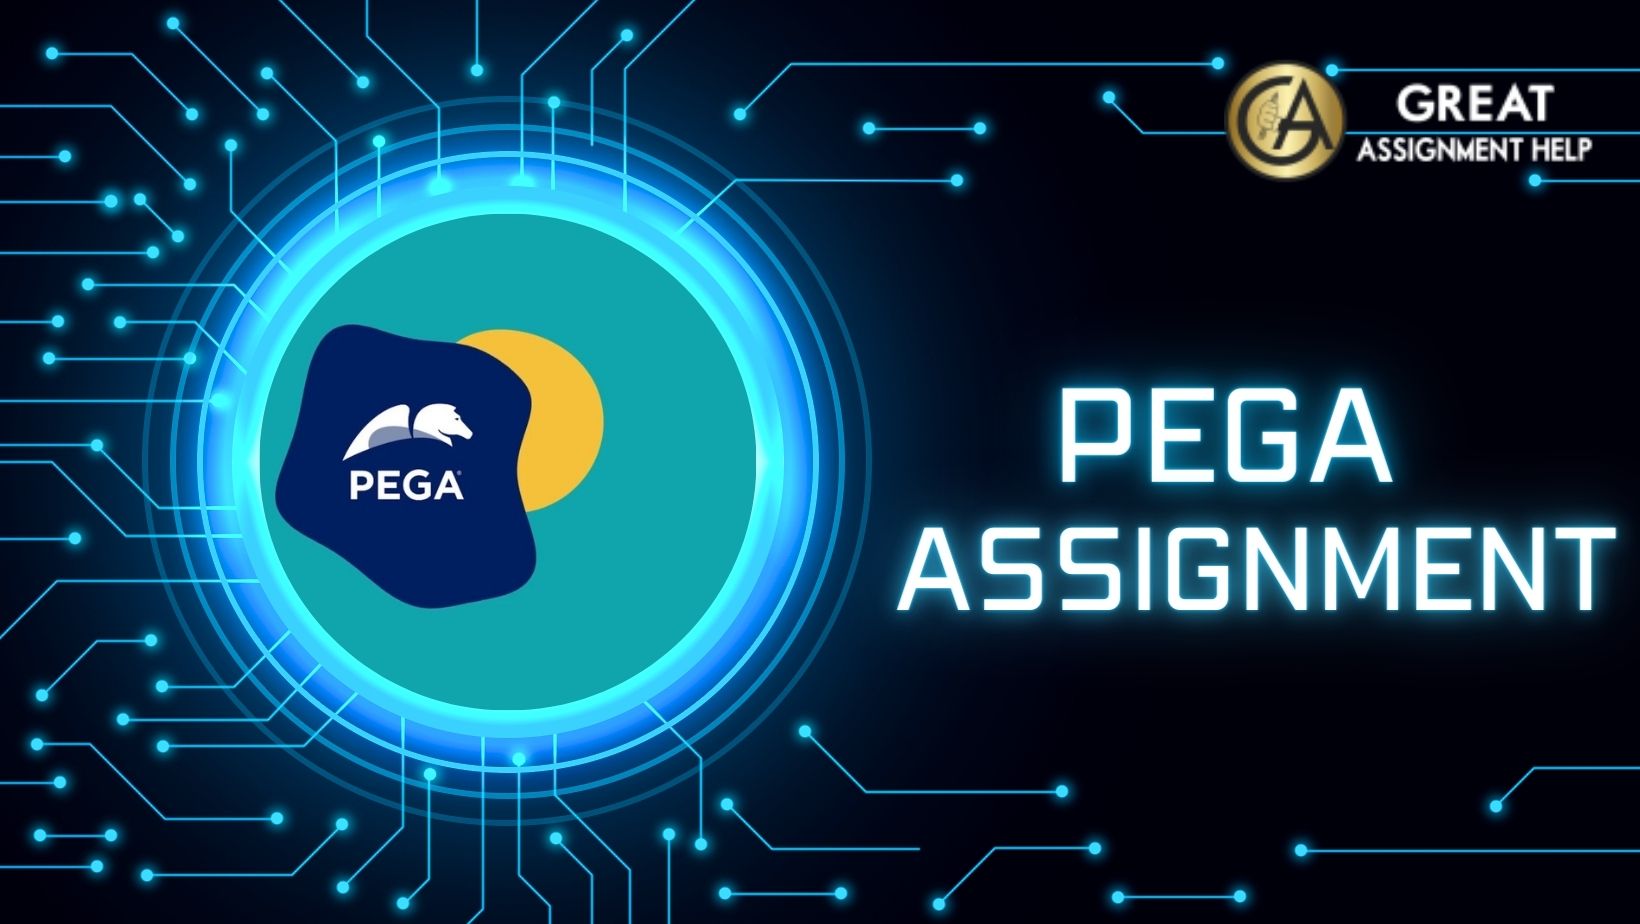 Reasons Why PEGA Assignment Help is Essential for Your Career Growth